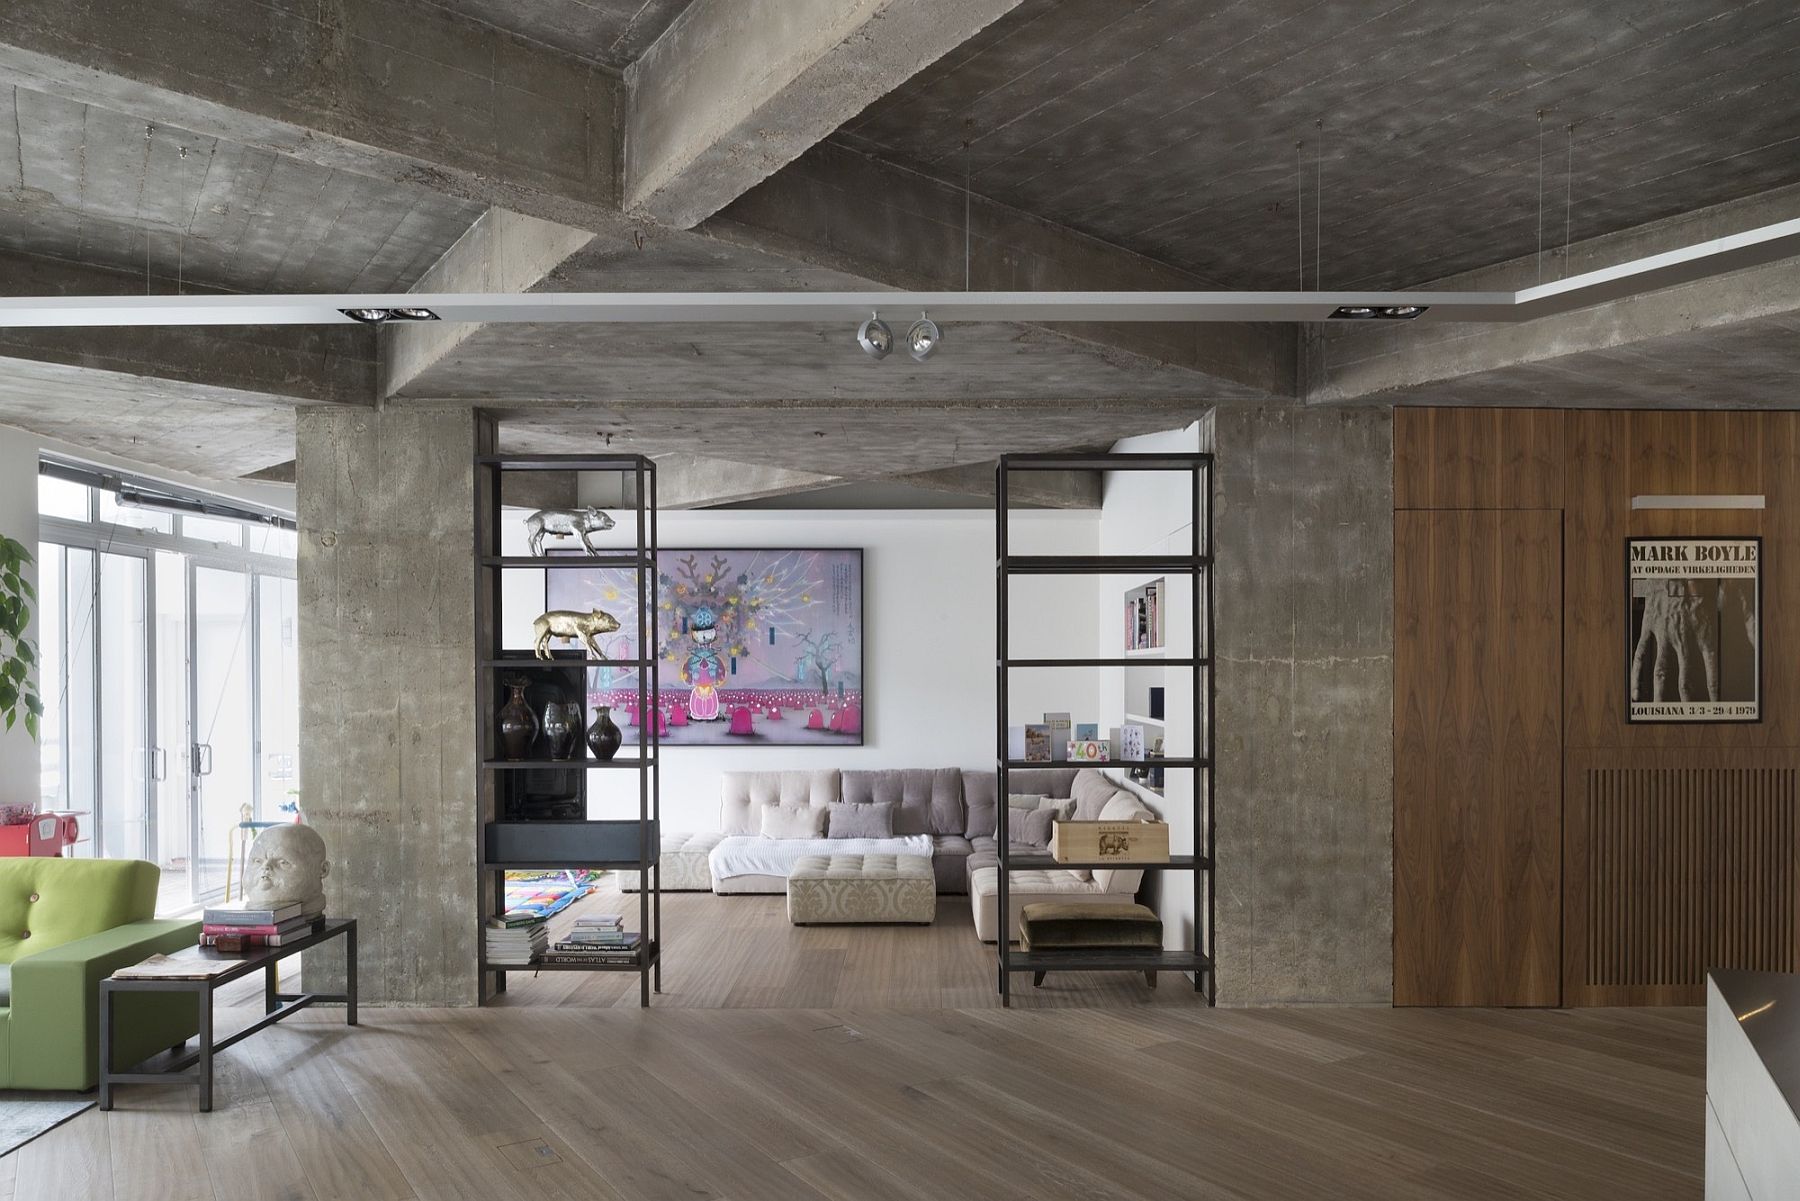 Exposed-concrete-walls-and-wooden-flooring-shape-a-stylish-industrial-loft